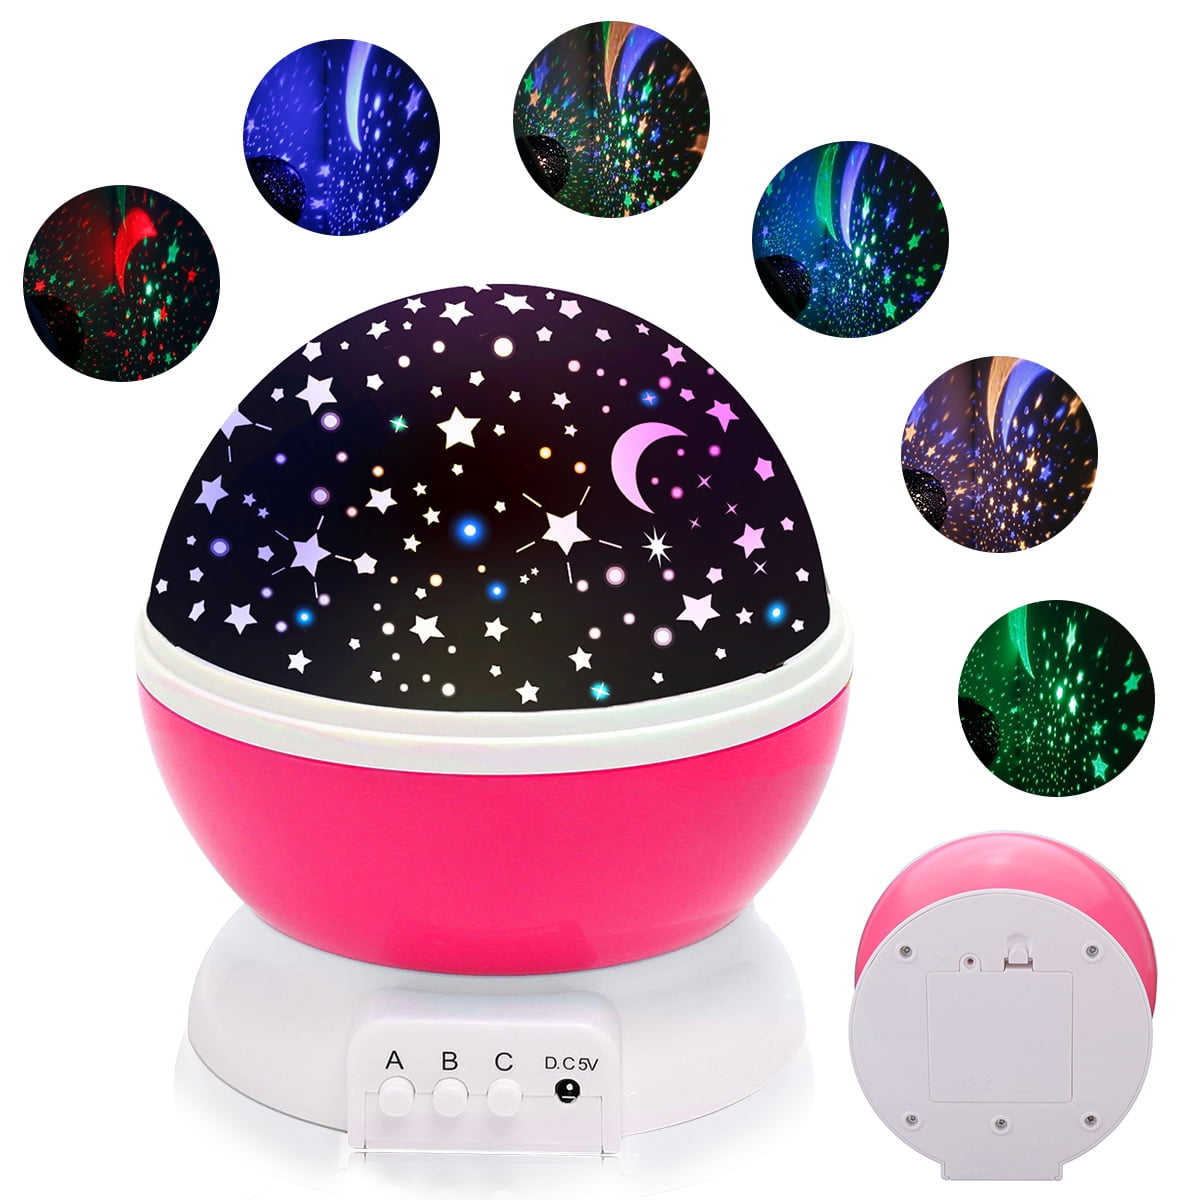 Details about   Star Night Light Laser Projector Starry Galaxy Ocean Sky Party Speaker LED Lamp 